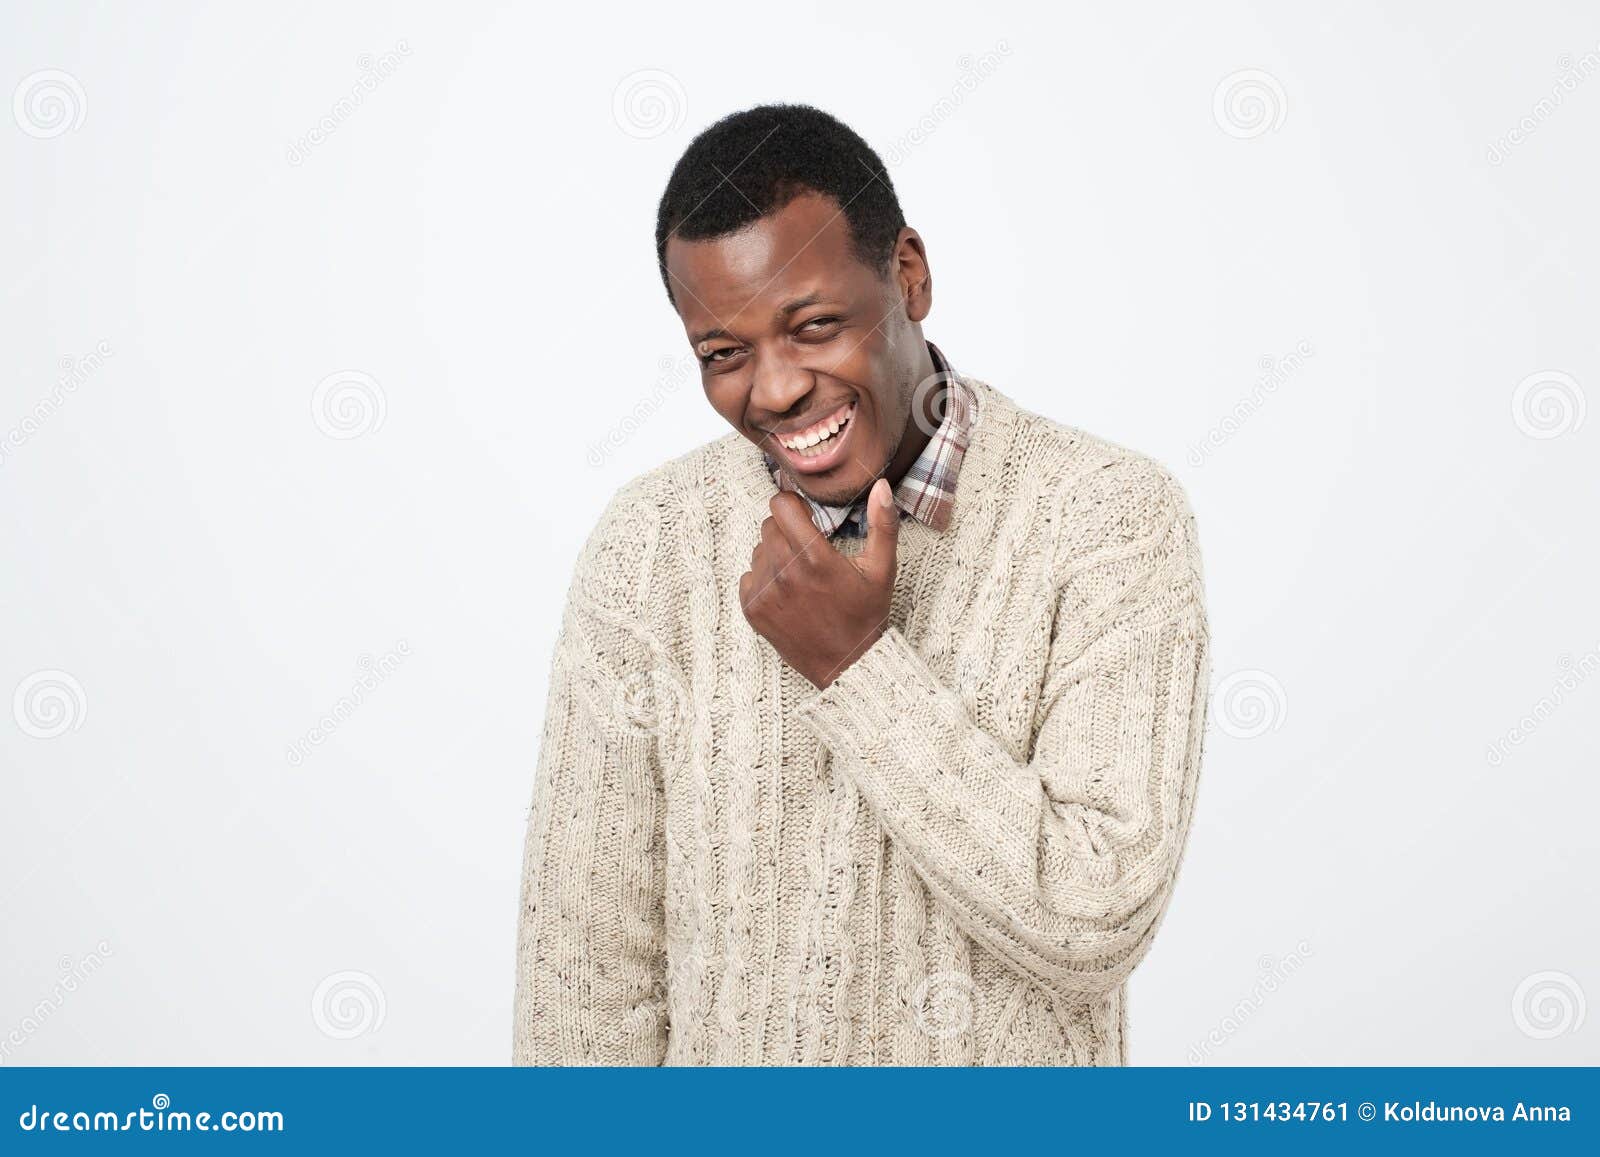 African Man Laughing Out Loud at Funny Meme or Joke he Found on Internet,  Smiling Broadly. Positive Human Facial Stock Image - Image of afro,  portrait: 131434761